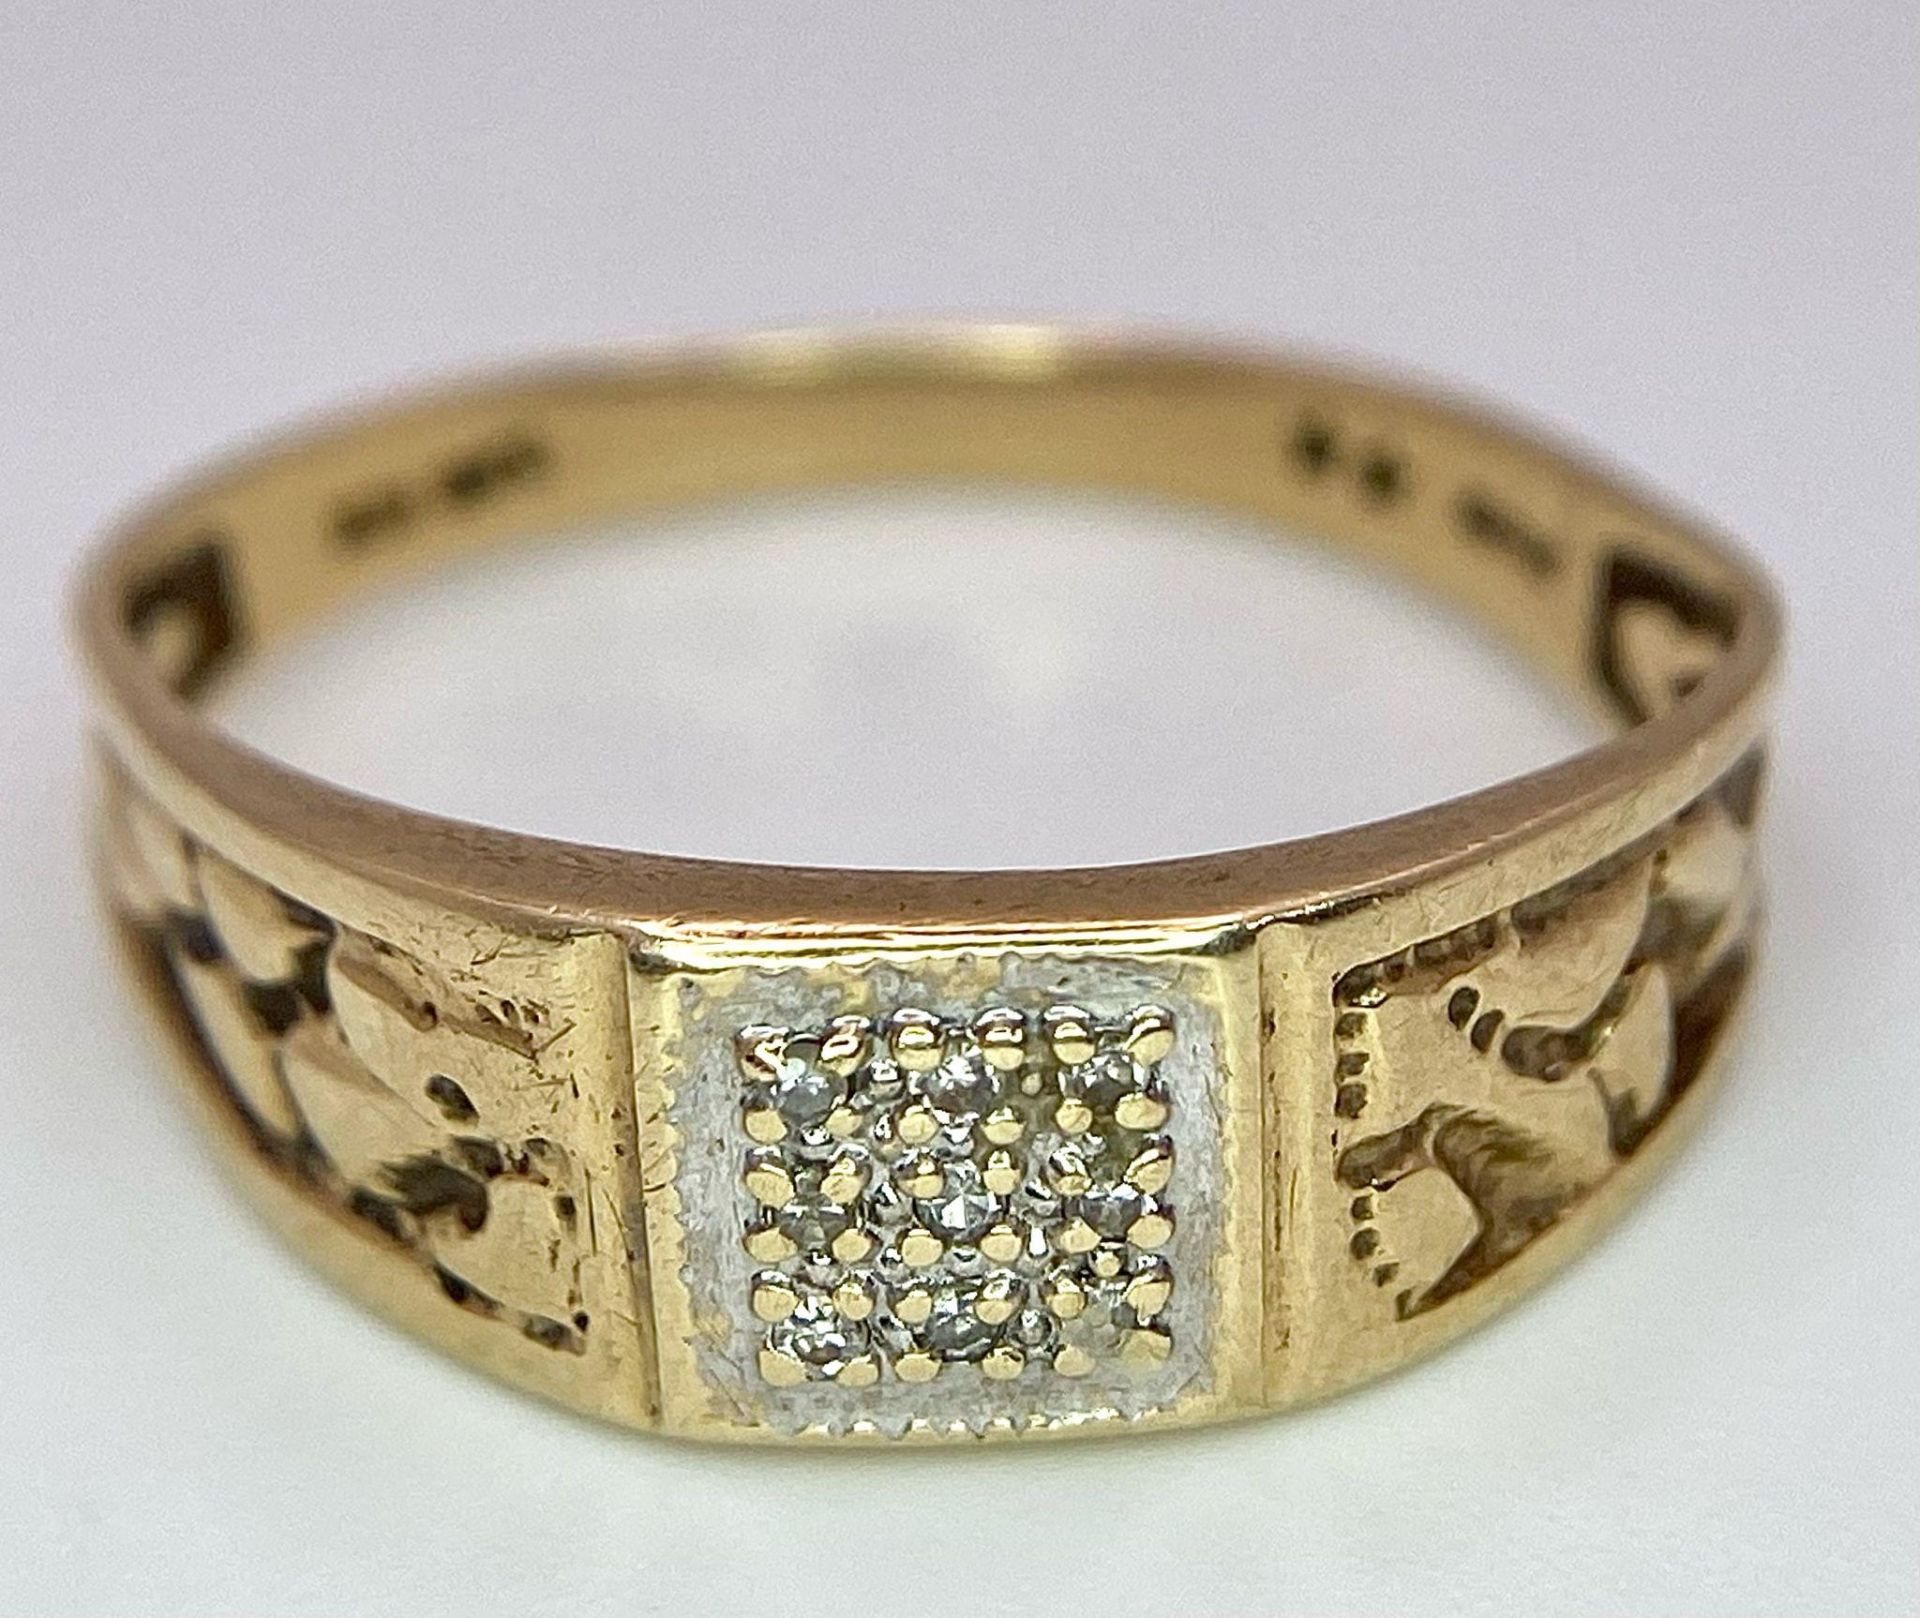 A VINTAGE GENTS 9K YELLOW GOLD DIAMOND BAND RING WITH PATTERNED SHOULDERS - 0.01CT DIAMOND - 2G - Image 4 of 6